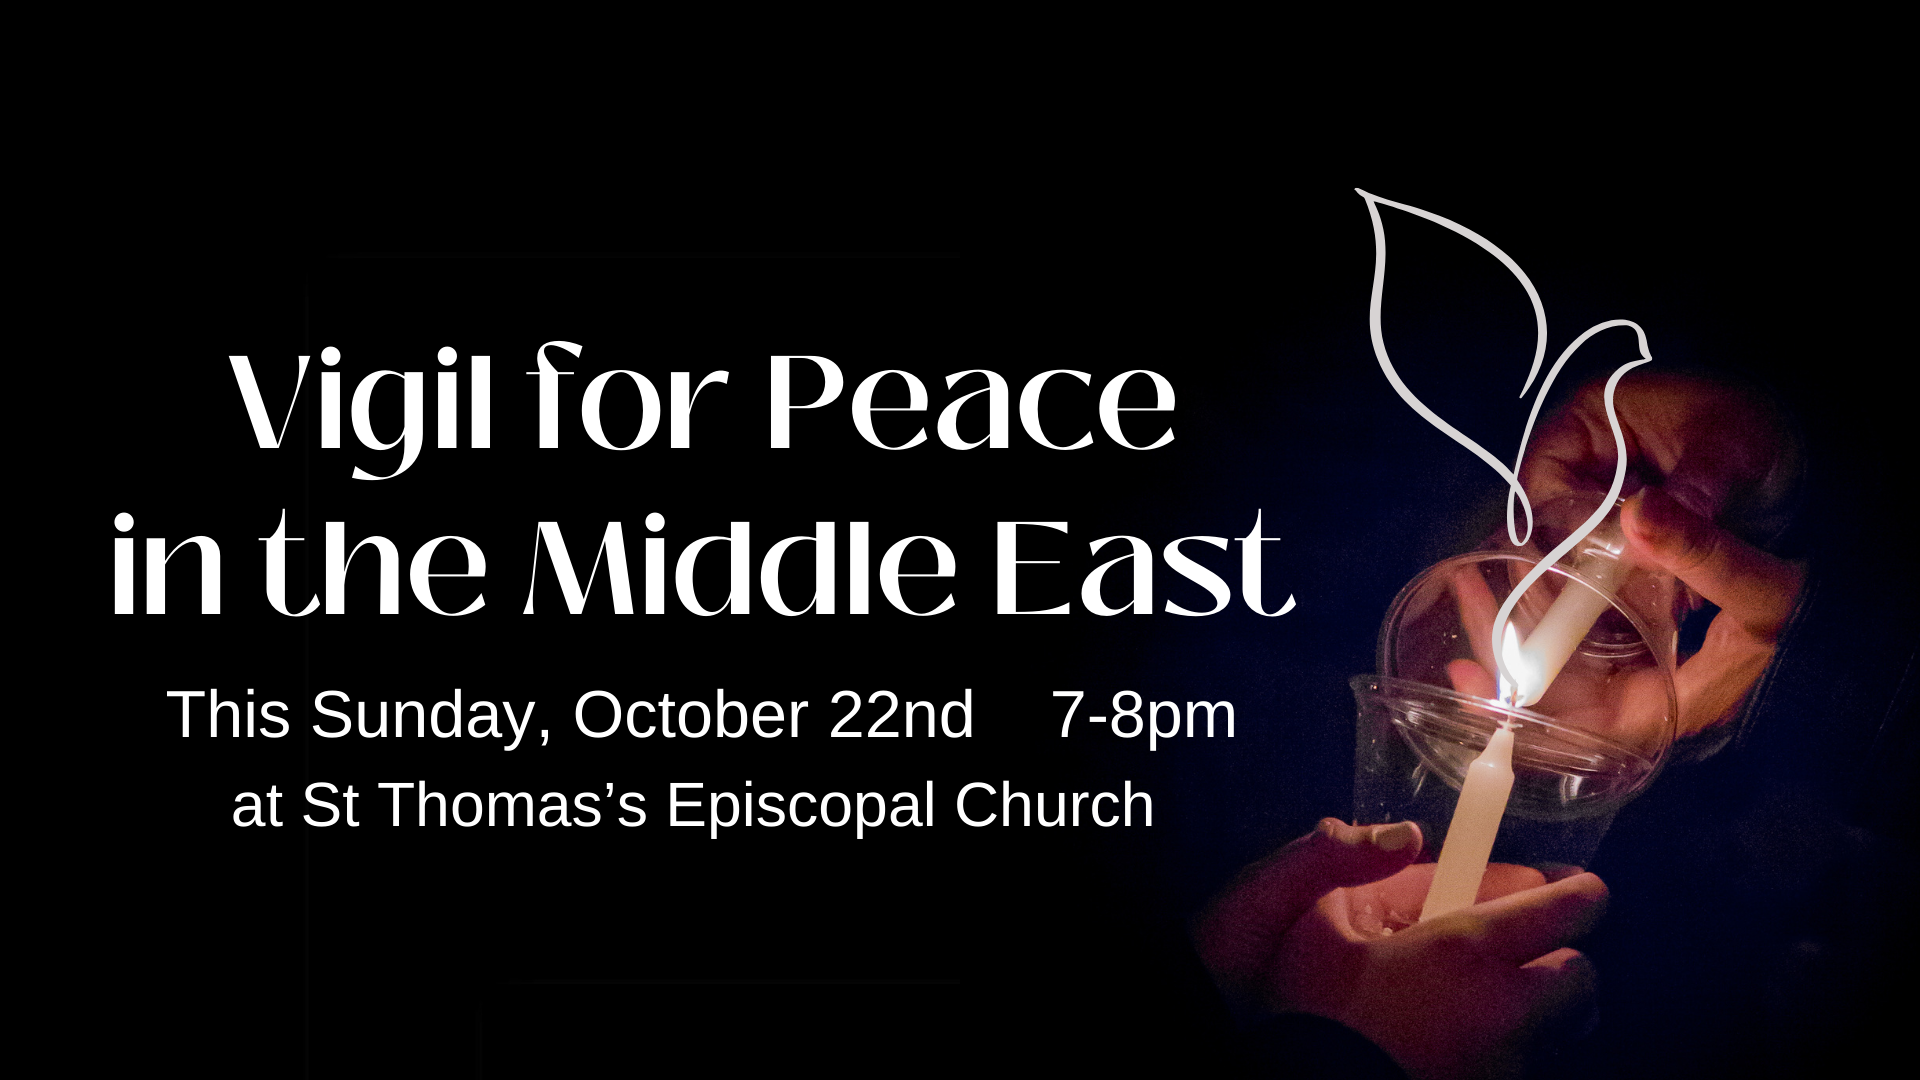 Vigil for Peace in the Middle East 